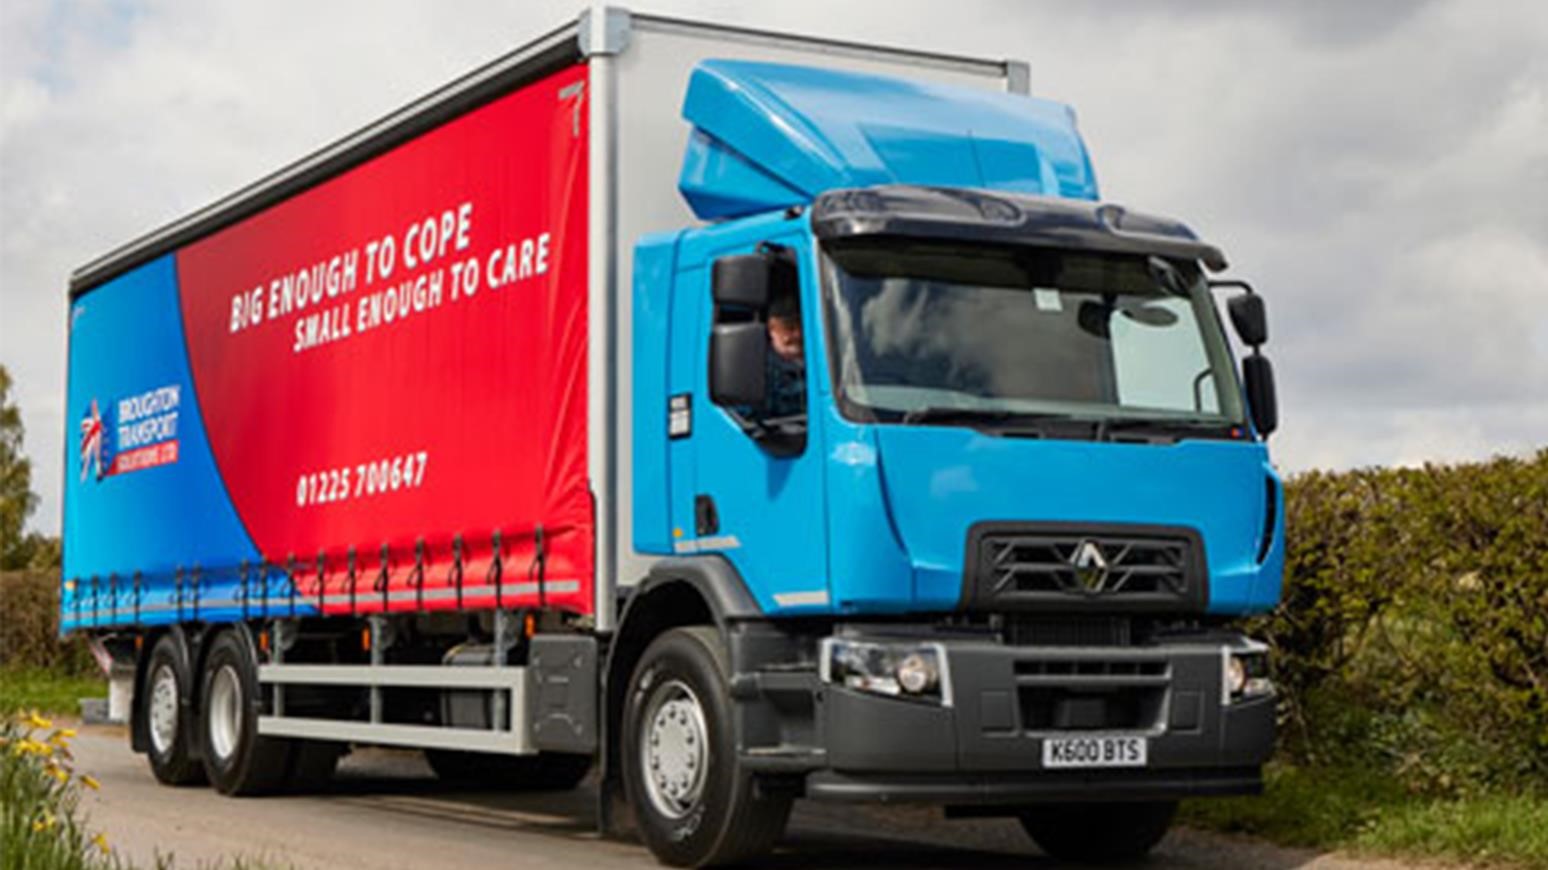 Broughton Transport Solutions’ Distribution Fleet Grows By One With Addition Of First Renault Truck